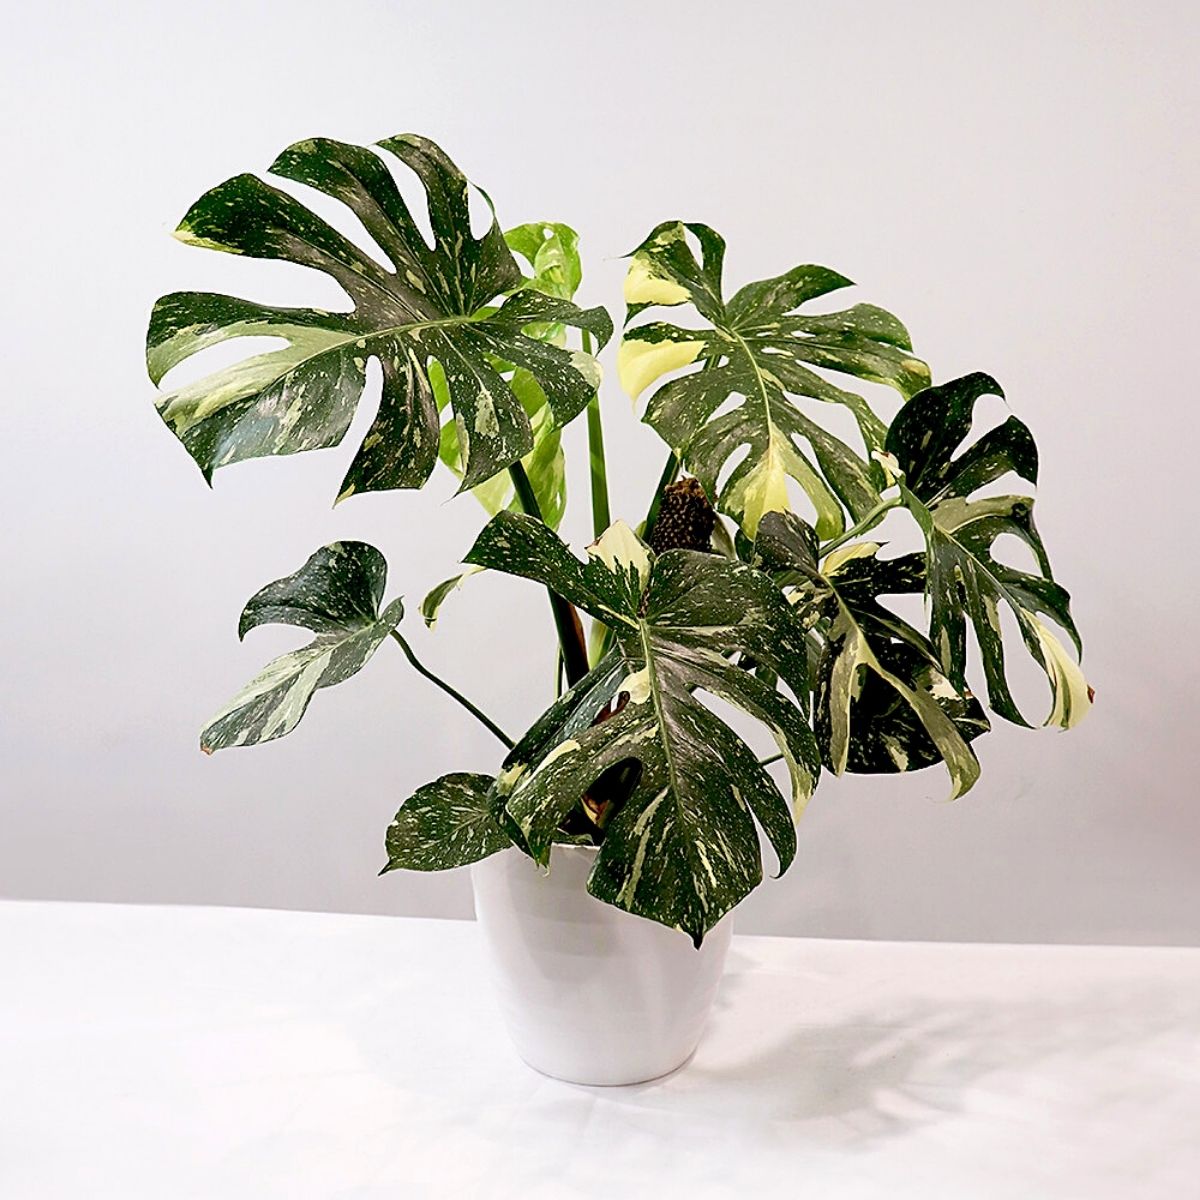 Lighting Tips For Your Thai Constellation Monstera to Thrive- Article on Thursd